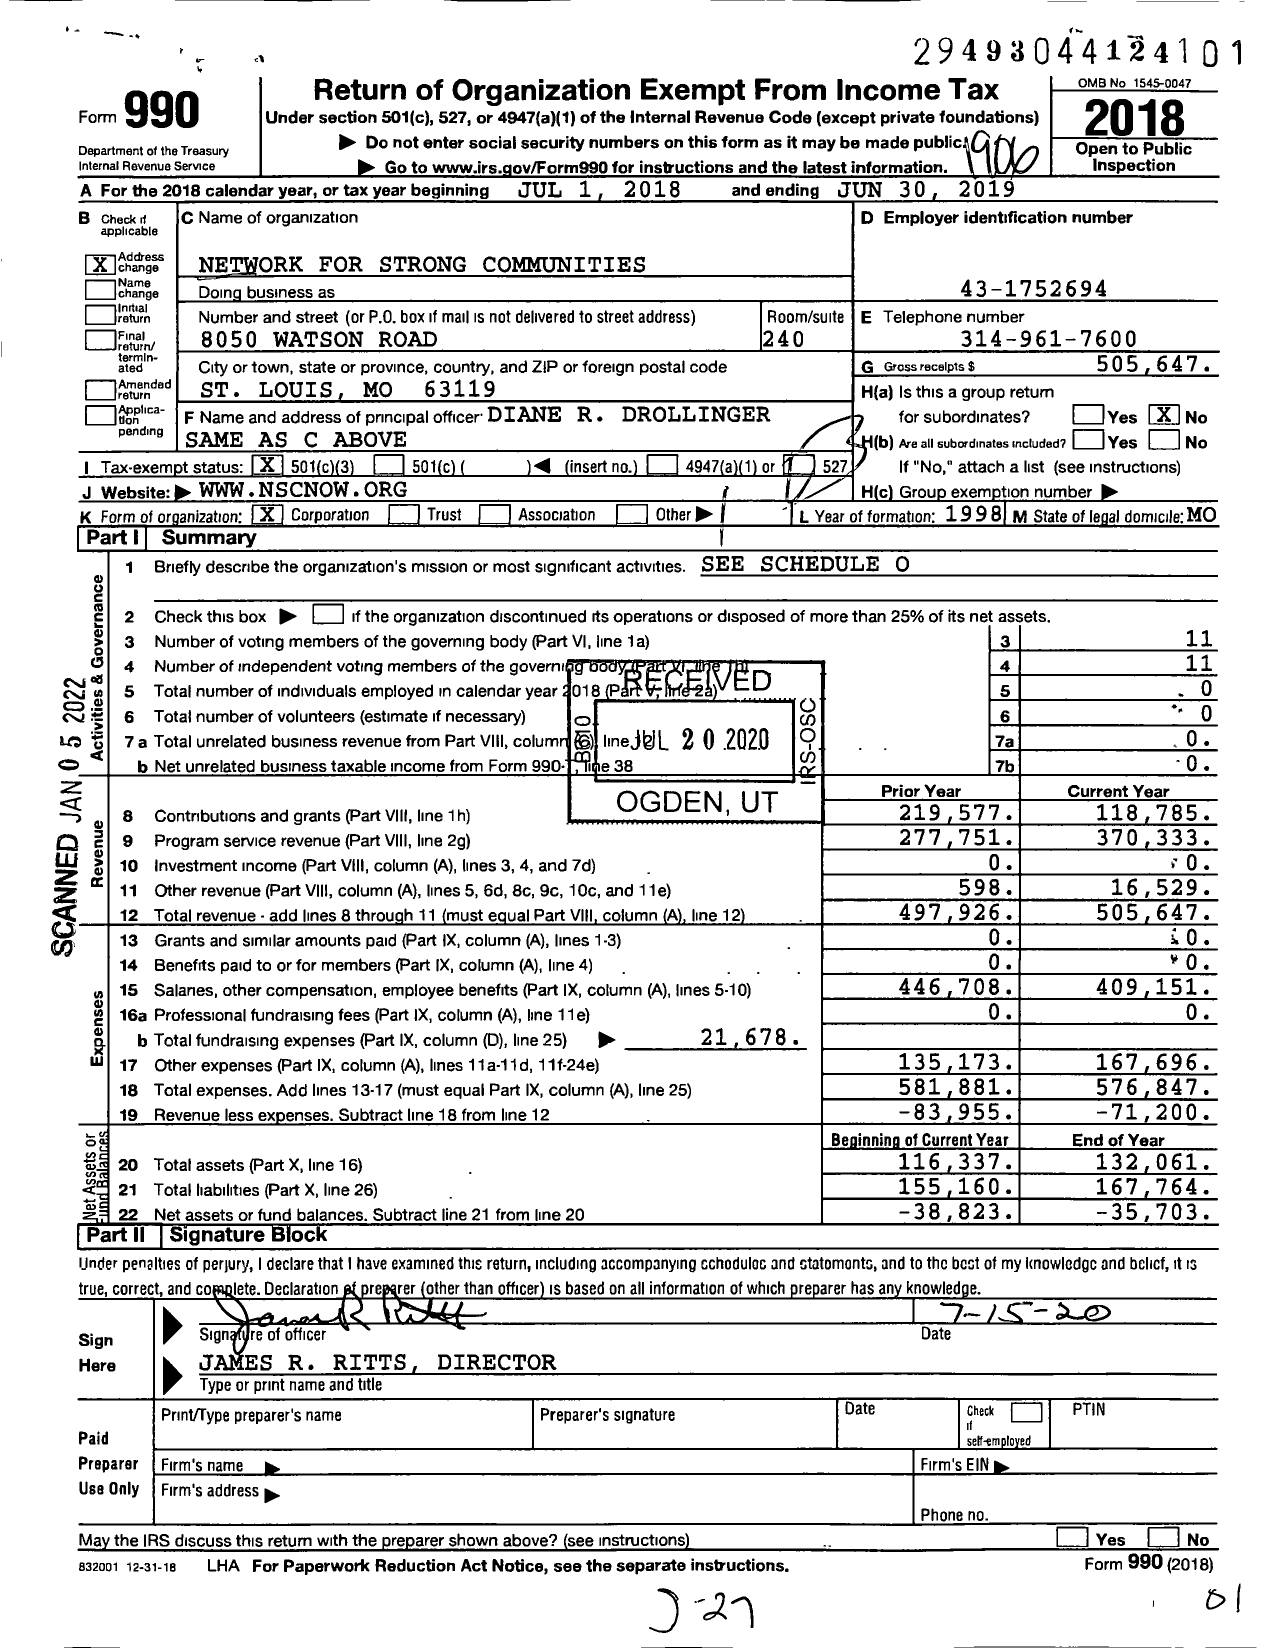 Image of first page of 2018 Form 990 for Network for Strong Communities